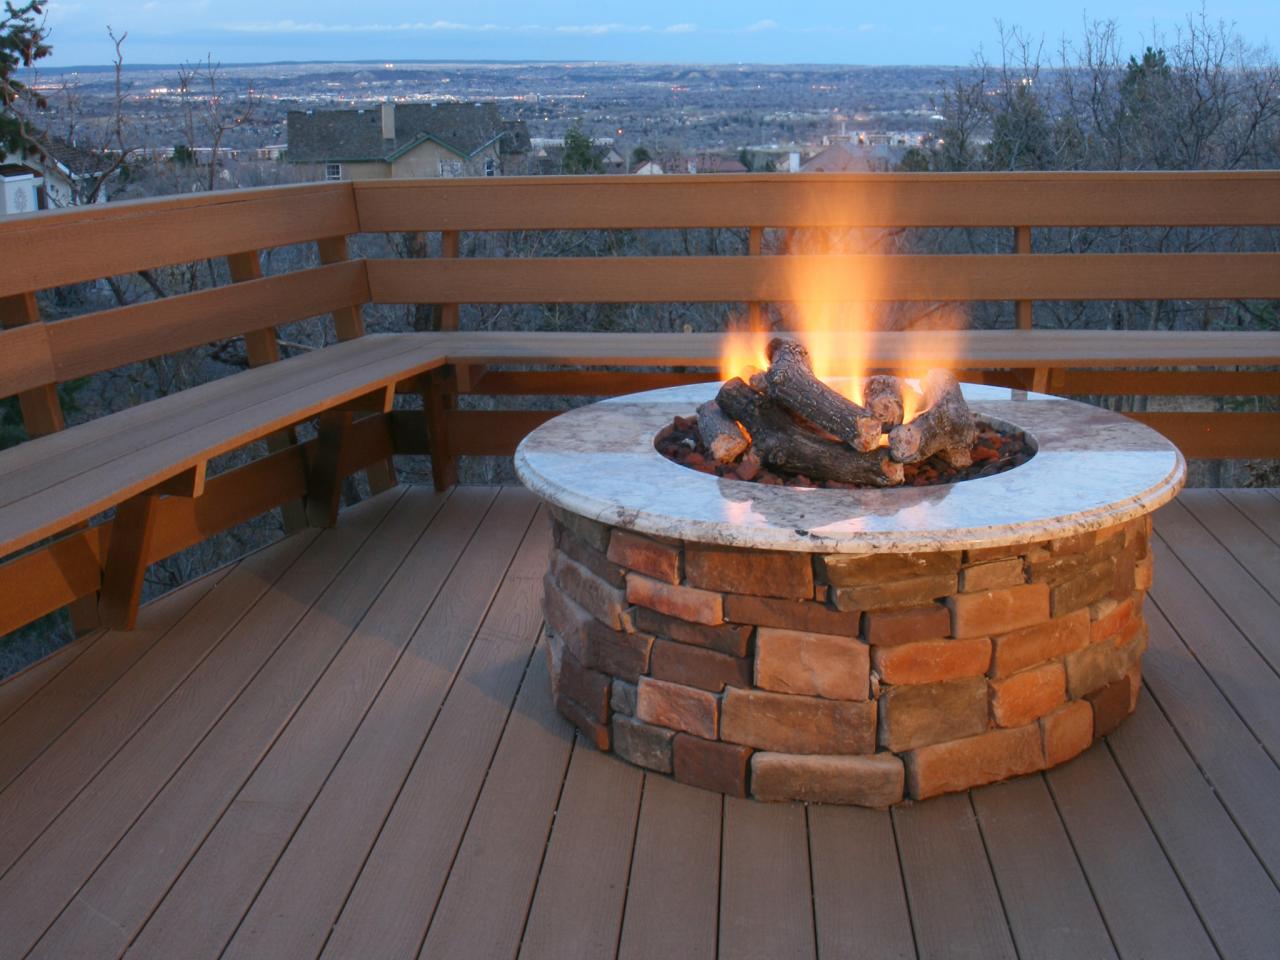 Brick And Concrete Fire Pits, Best Propane Fire Pit For Small Patio